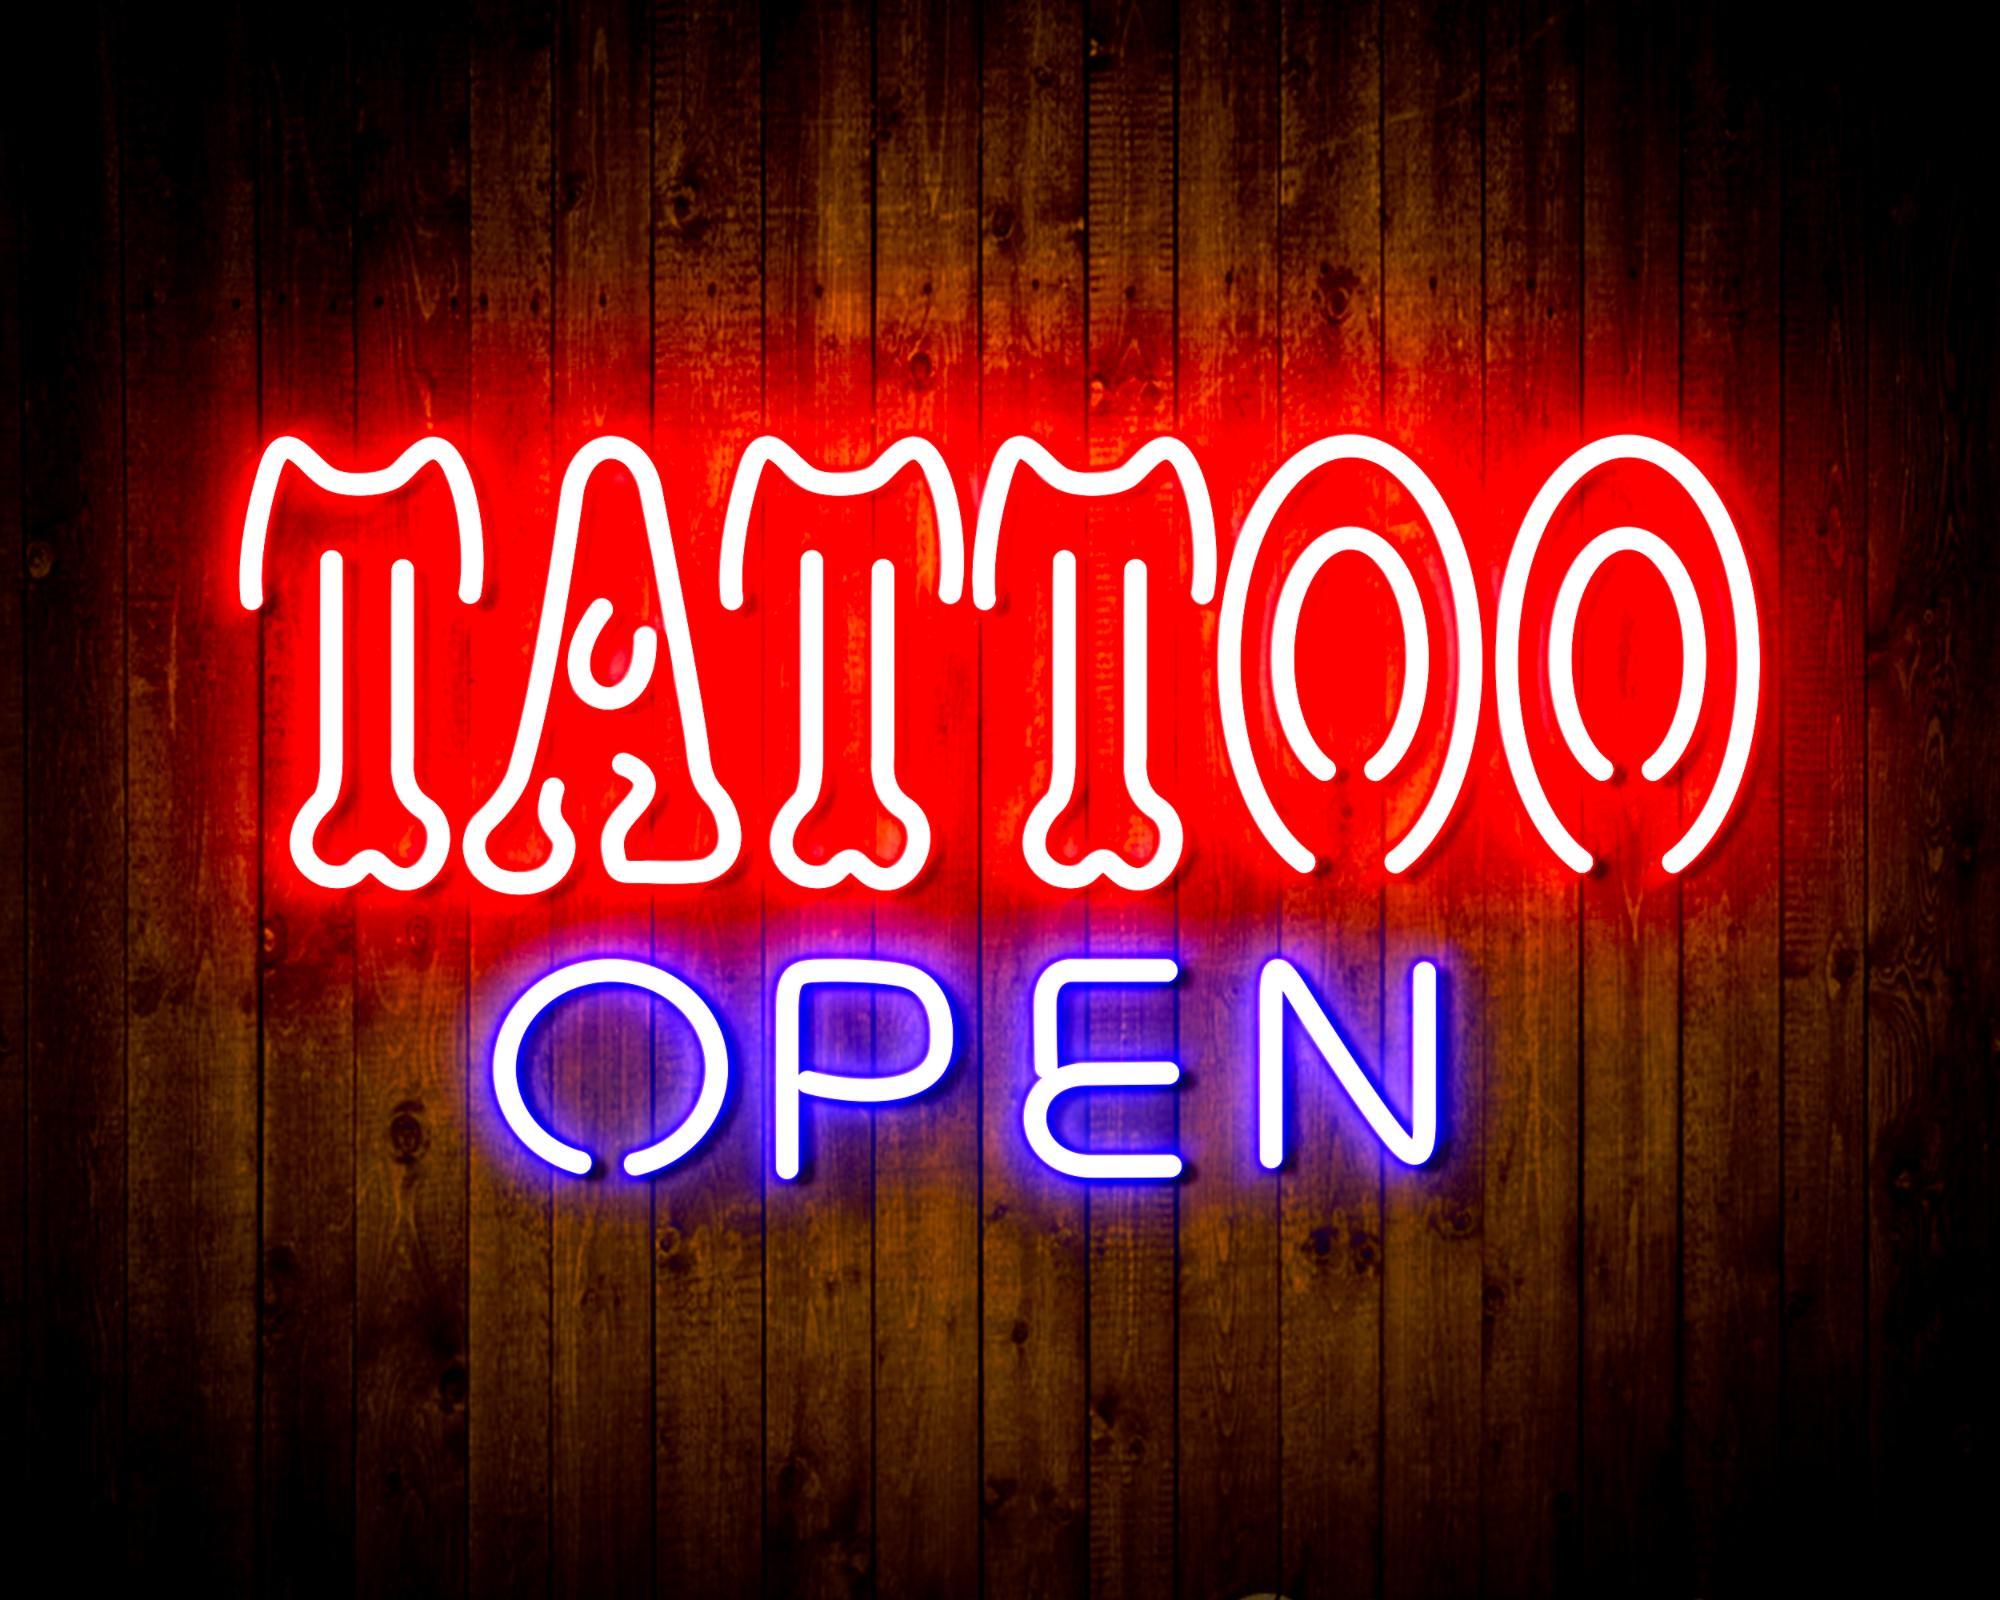 Tattoo Open LED Neon Sign Wall Light